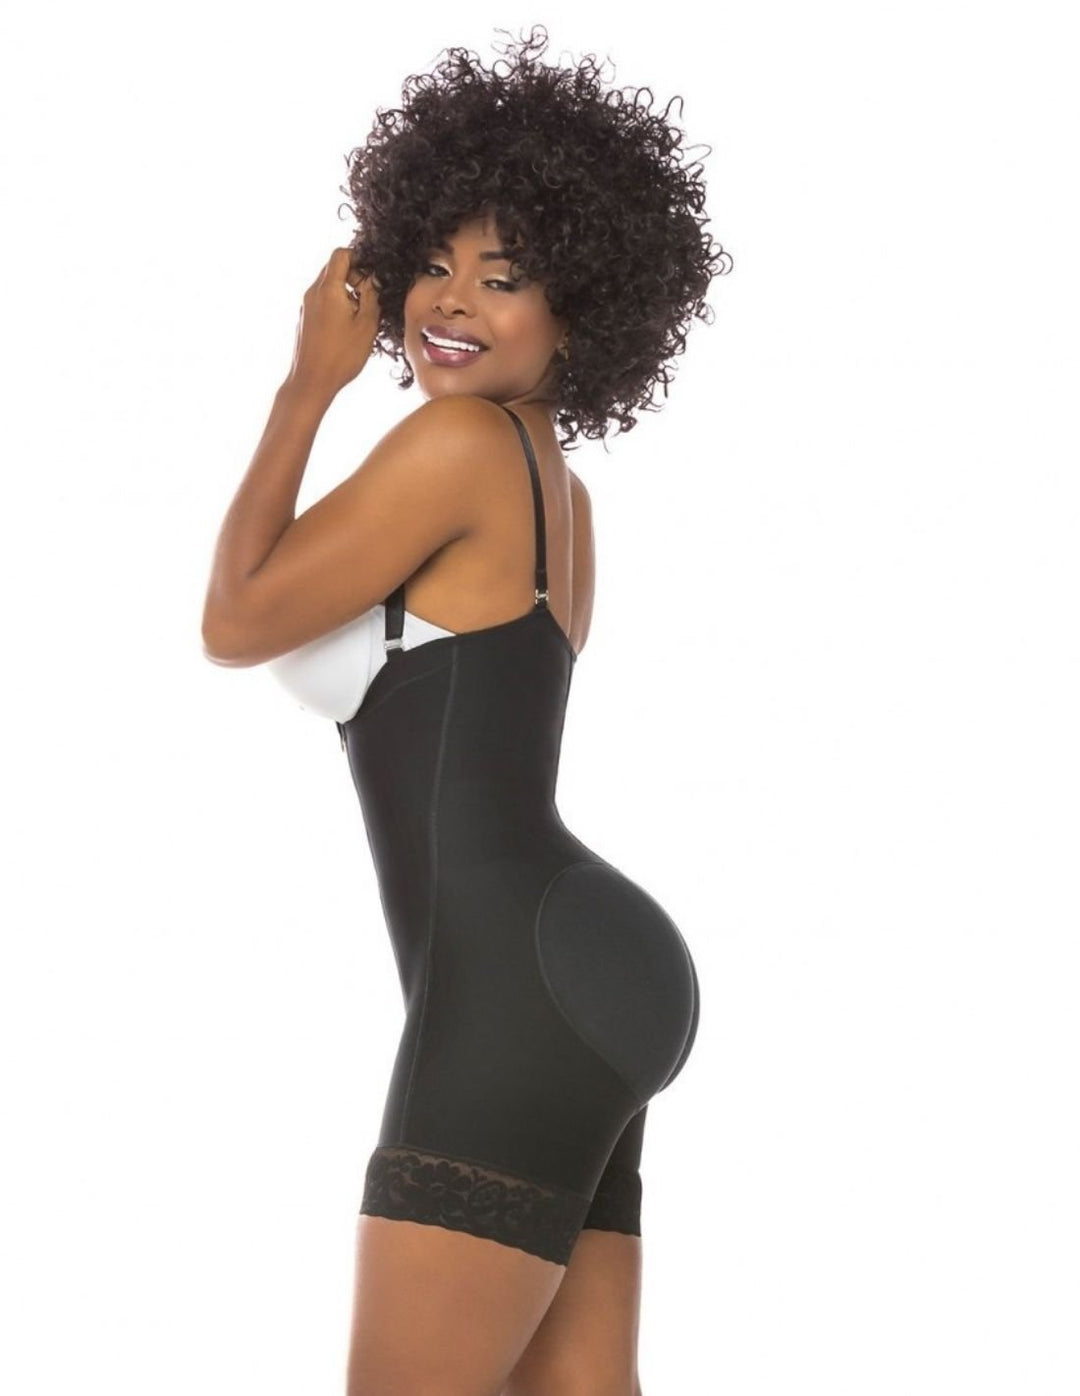 SALOME COLOMBIAN REDUCING GIRDLE